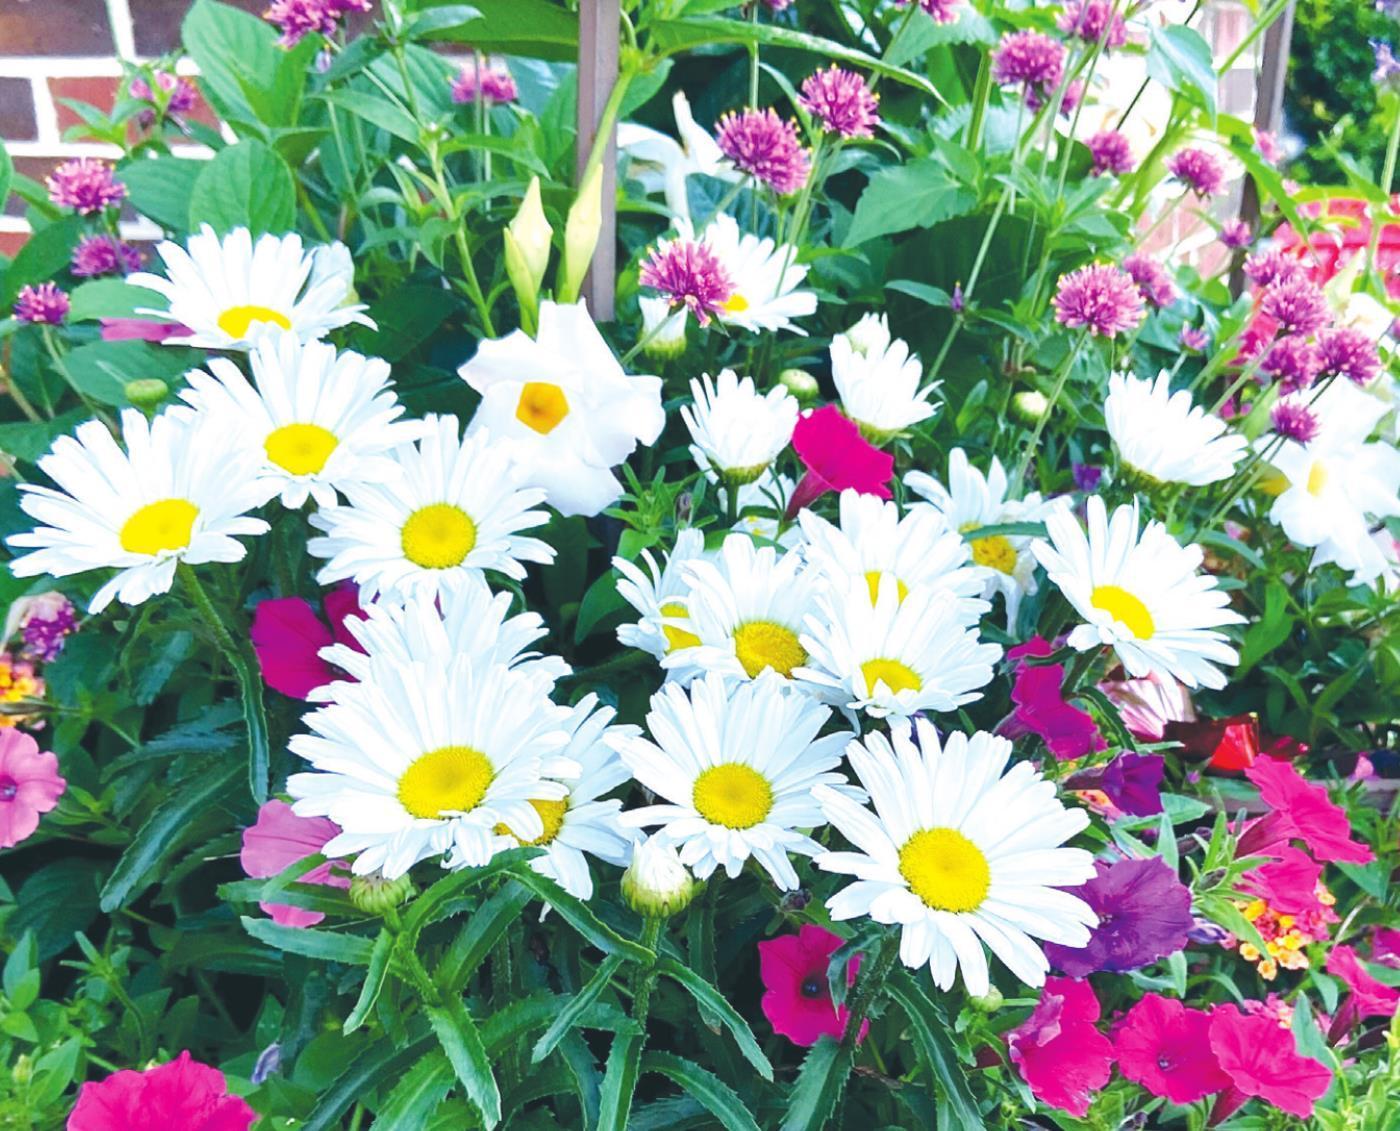 New Shasta Daisies like dessert for landscapes